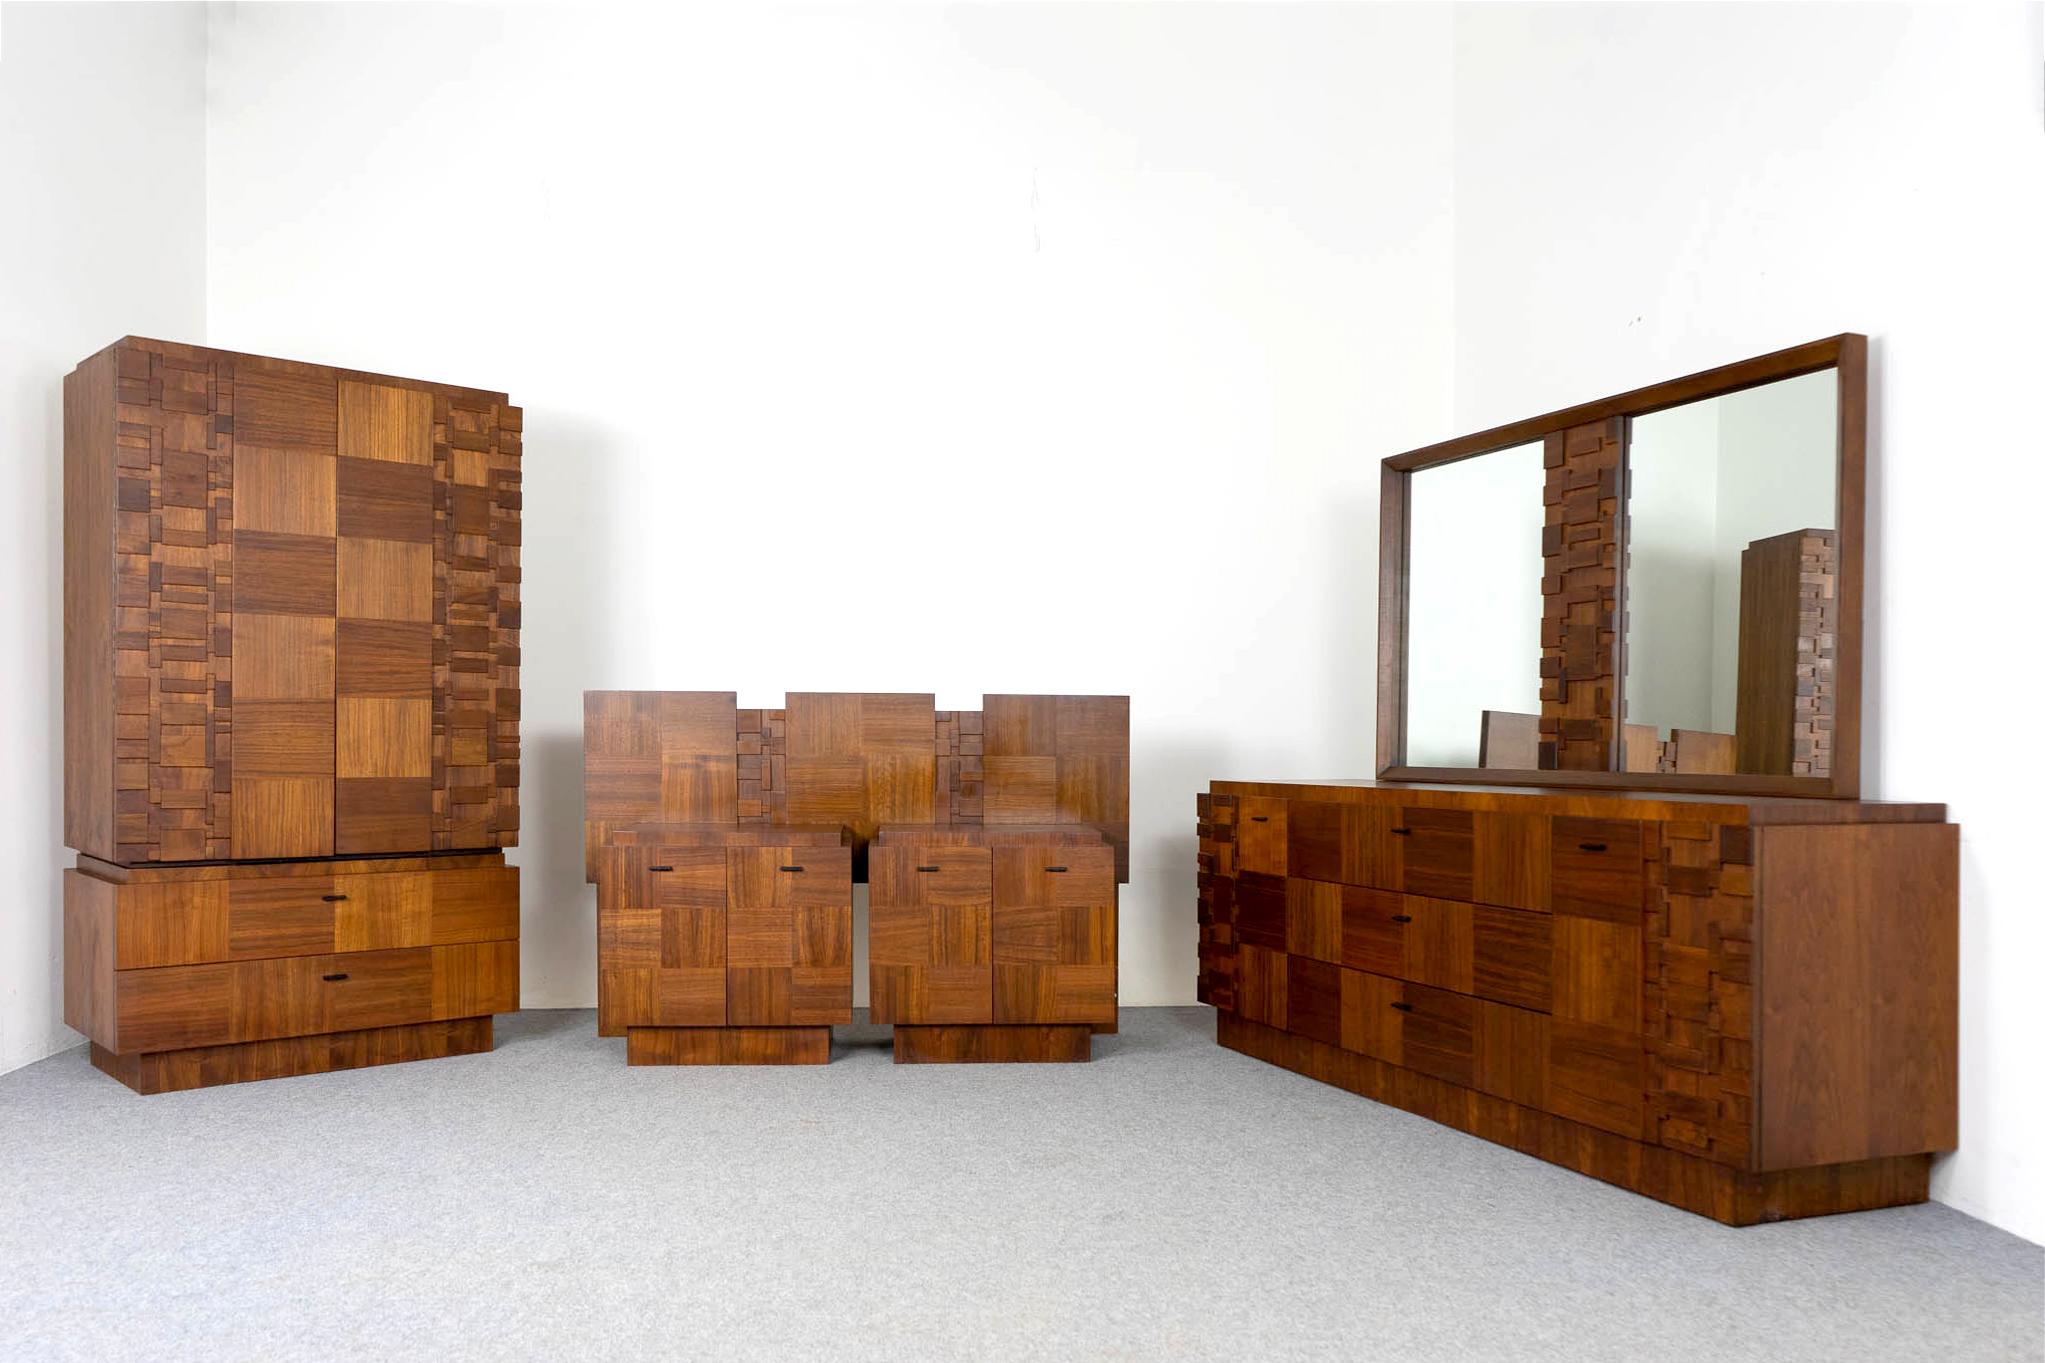 Walnut five piece brutalist bedroom suite, circa 1970's. A sculptural, bold and impressive set with substantial geometric fronts! Low dresser with mirror, gentleman's wardrobe, two bedside tables and a queen sized headboard. Great construction and